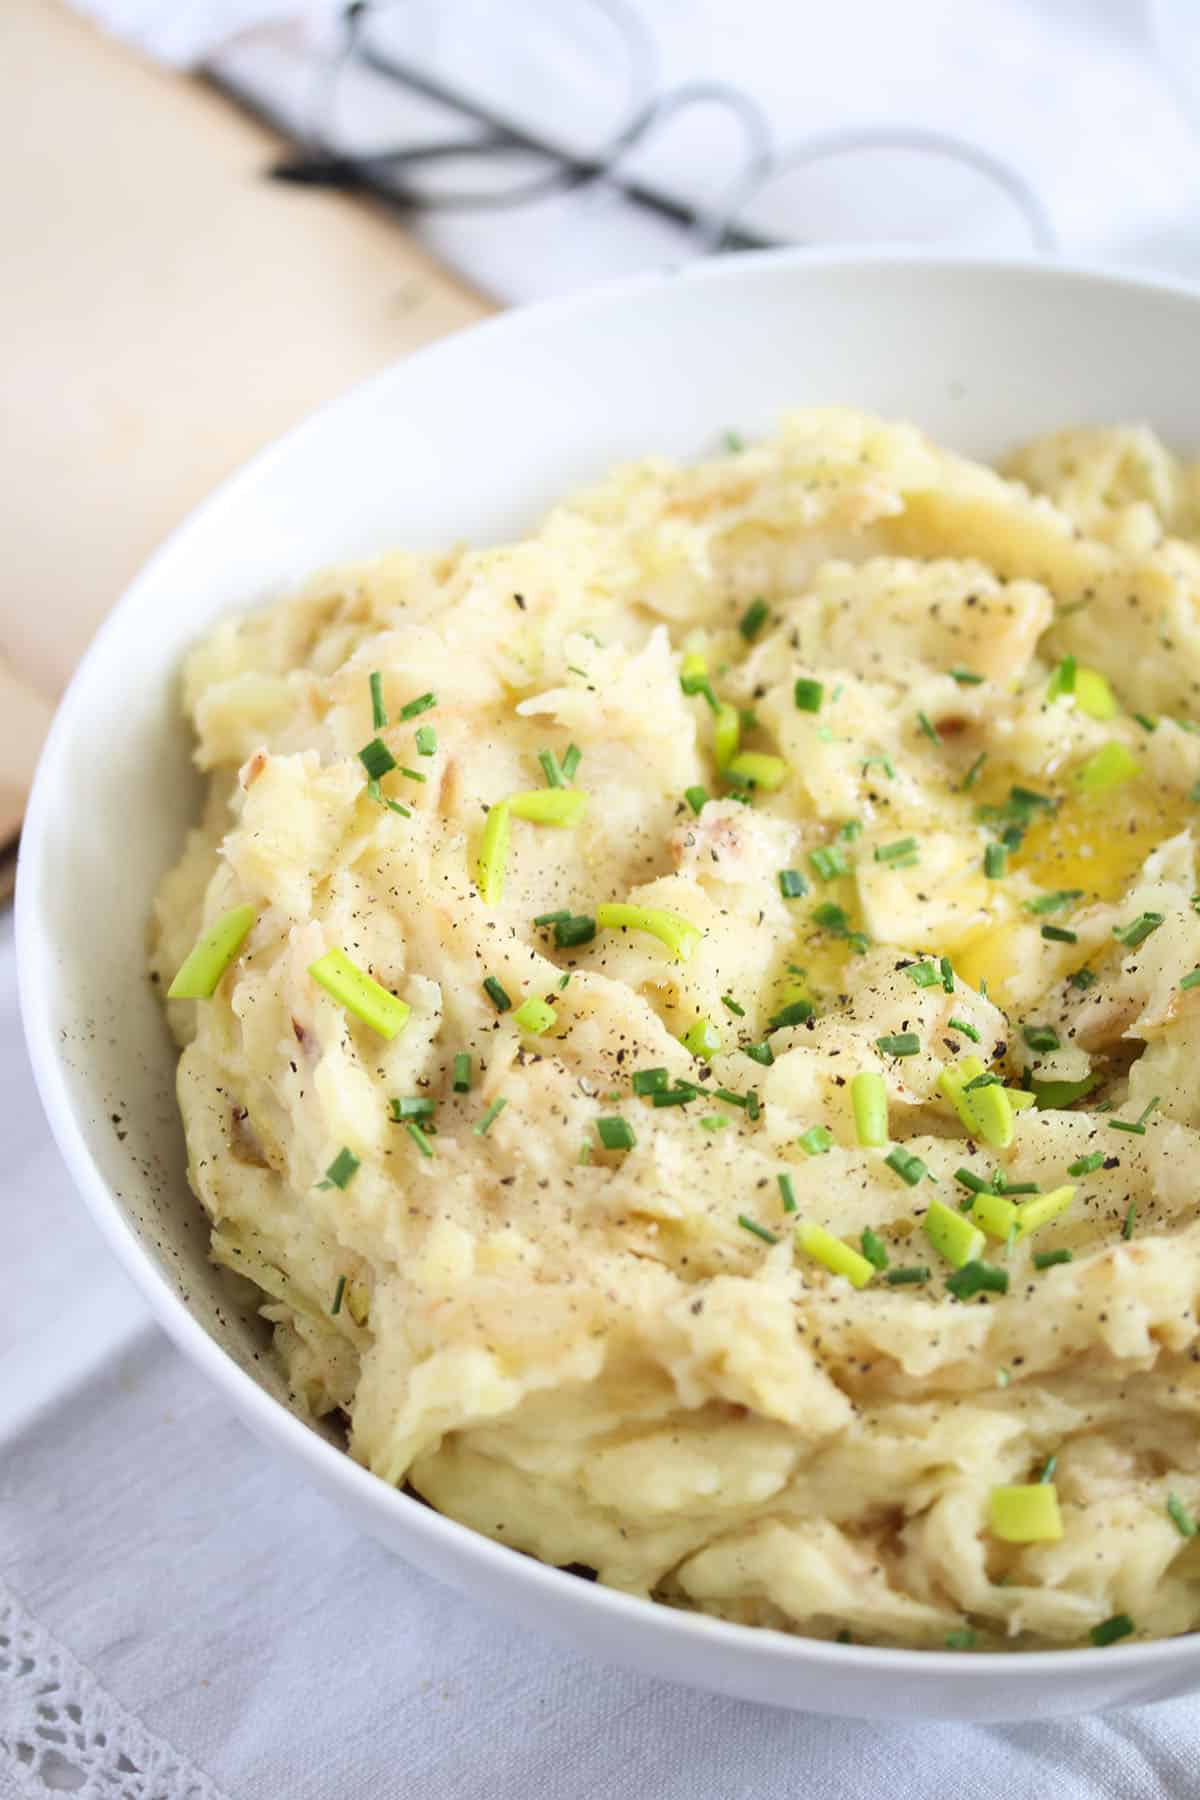 mashed potatoes with cabbage in a large bowl and a pair of glassees behind it.